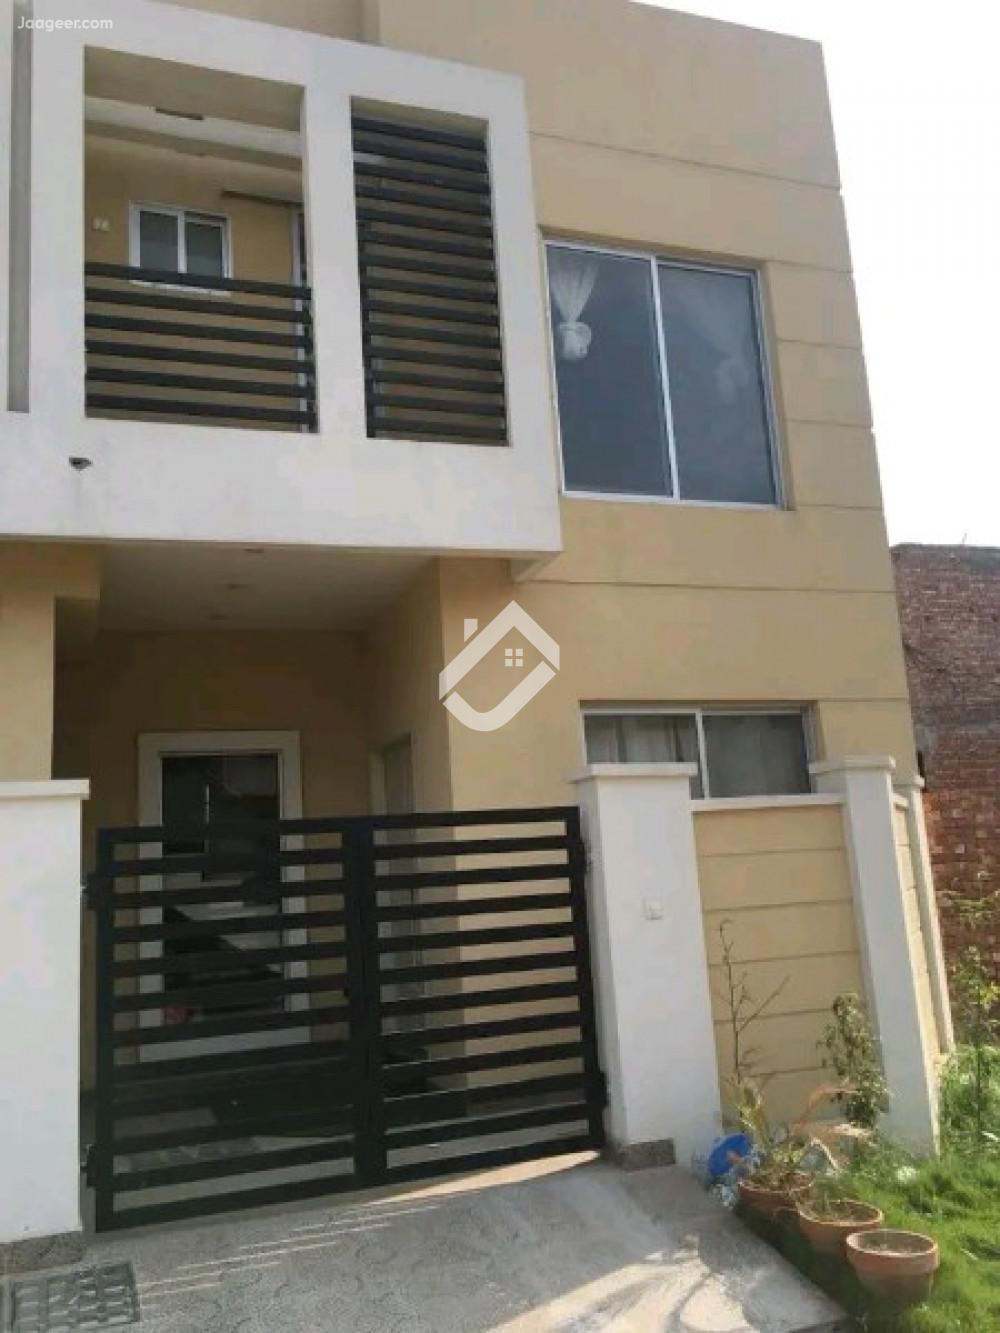 View  3 Marla House For Sale In Ferozpur Road  in Ferozpur Road, Lahore